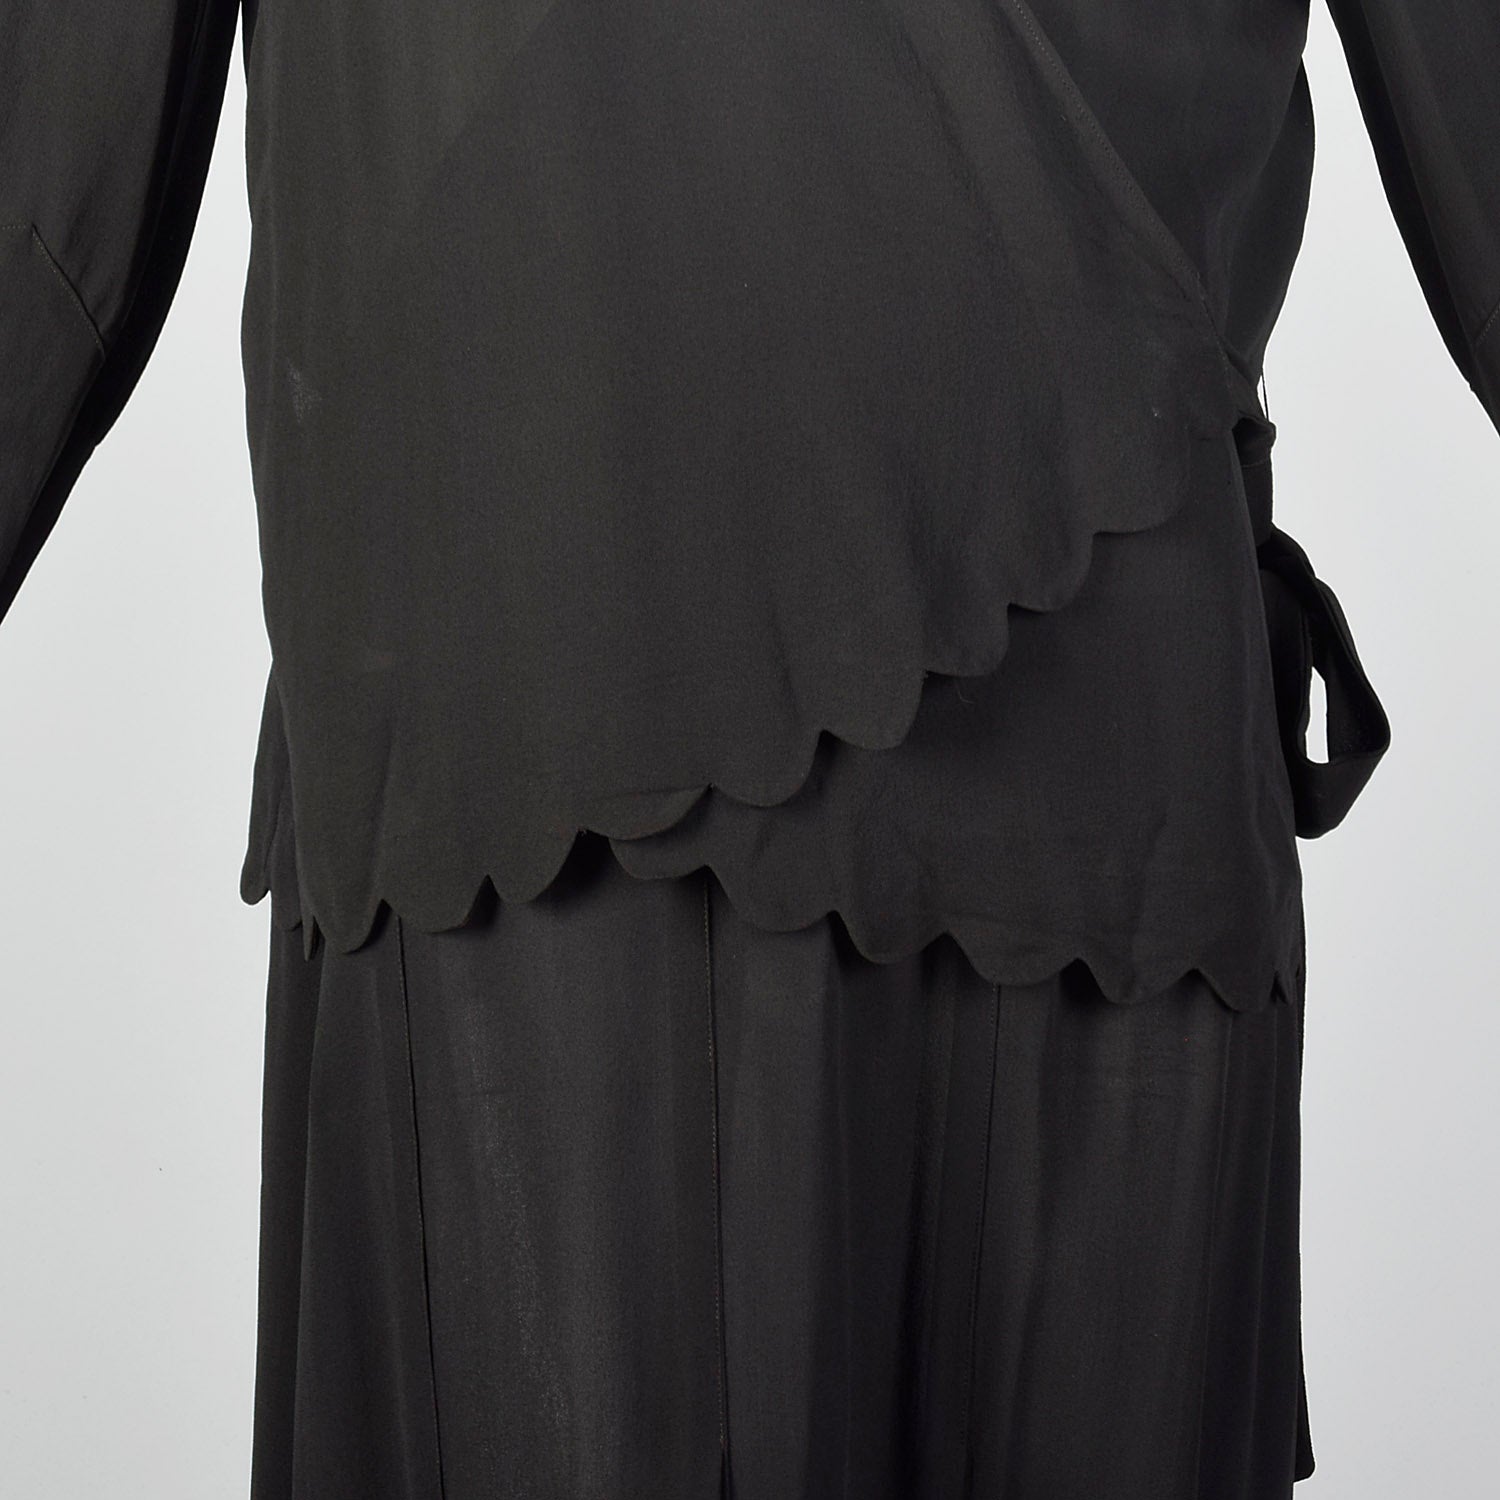 Large 1920s Dress and Wrap Top